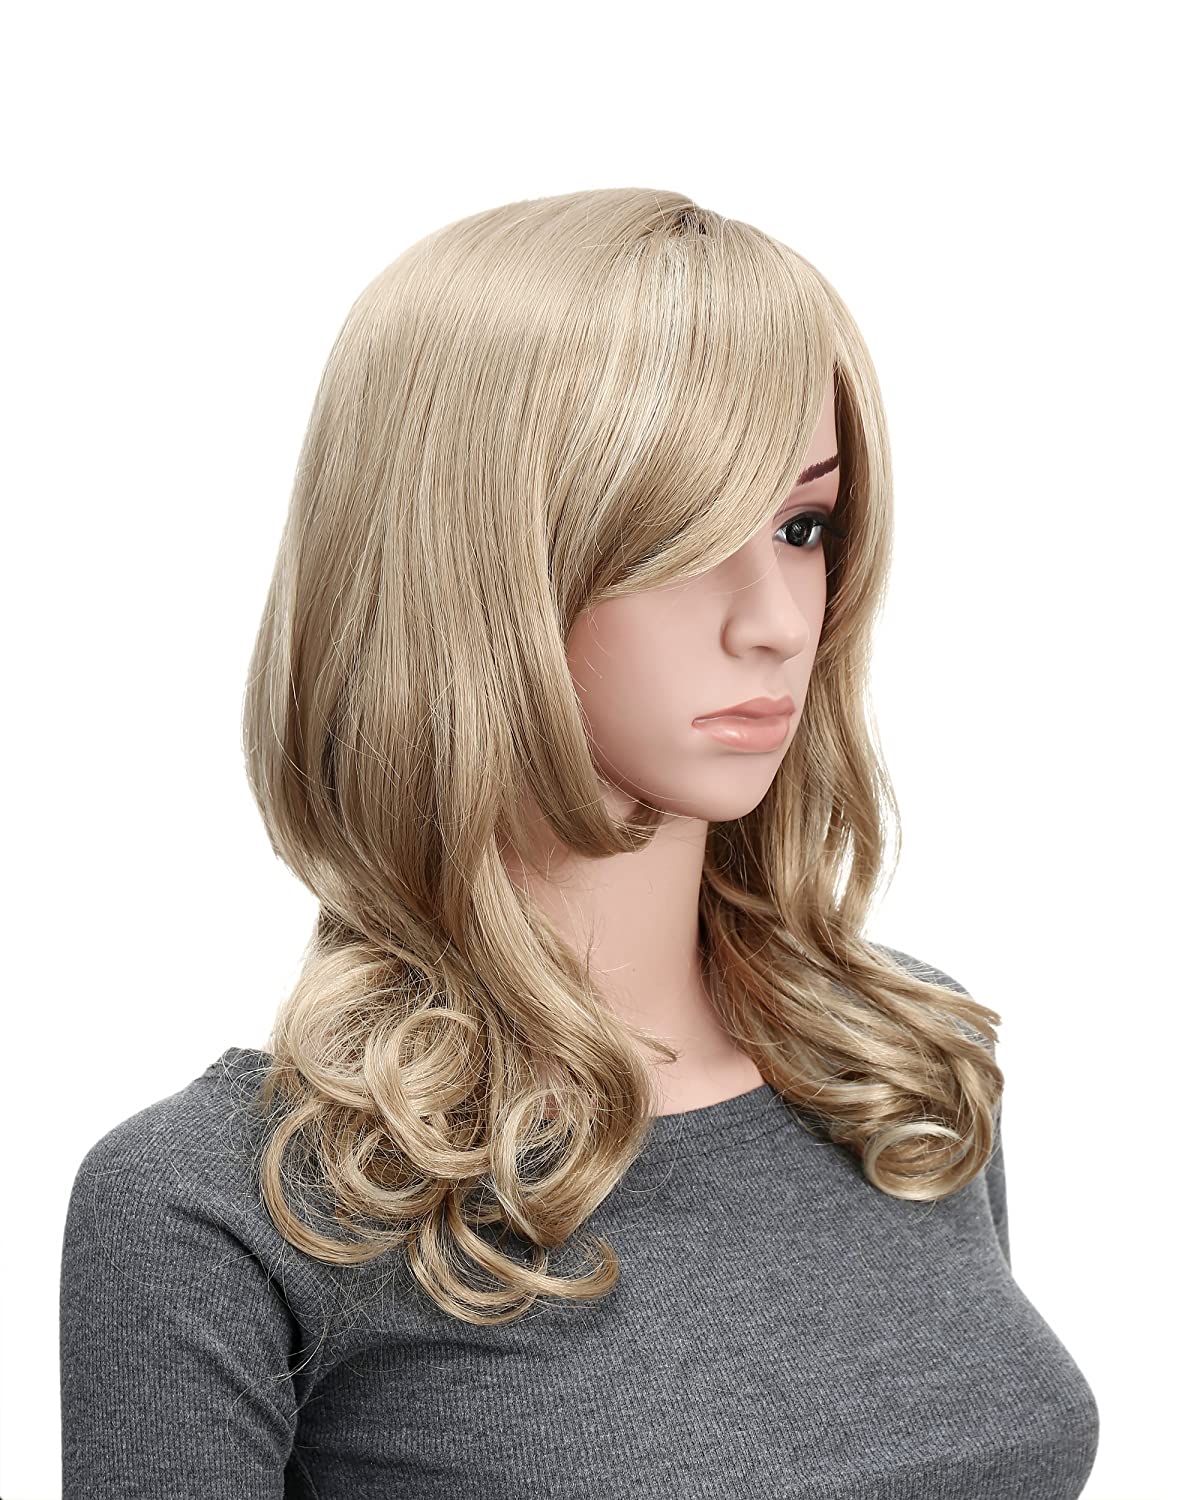 Onedor Full Head Beautiful Long Curly Wave Stunning Wig Charming Curly Costume Wigs with Fringe (24H613 Blonde Highlights) - image 2 of 6